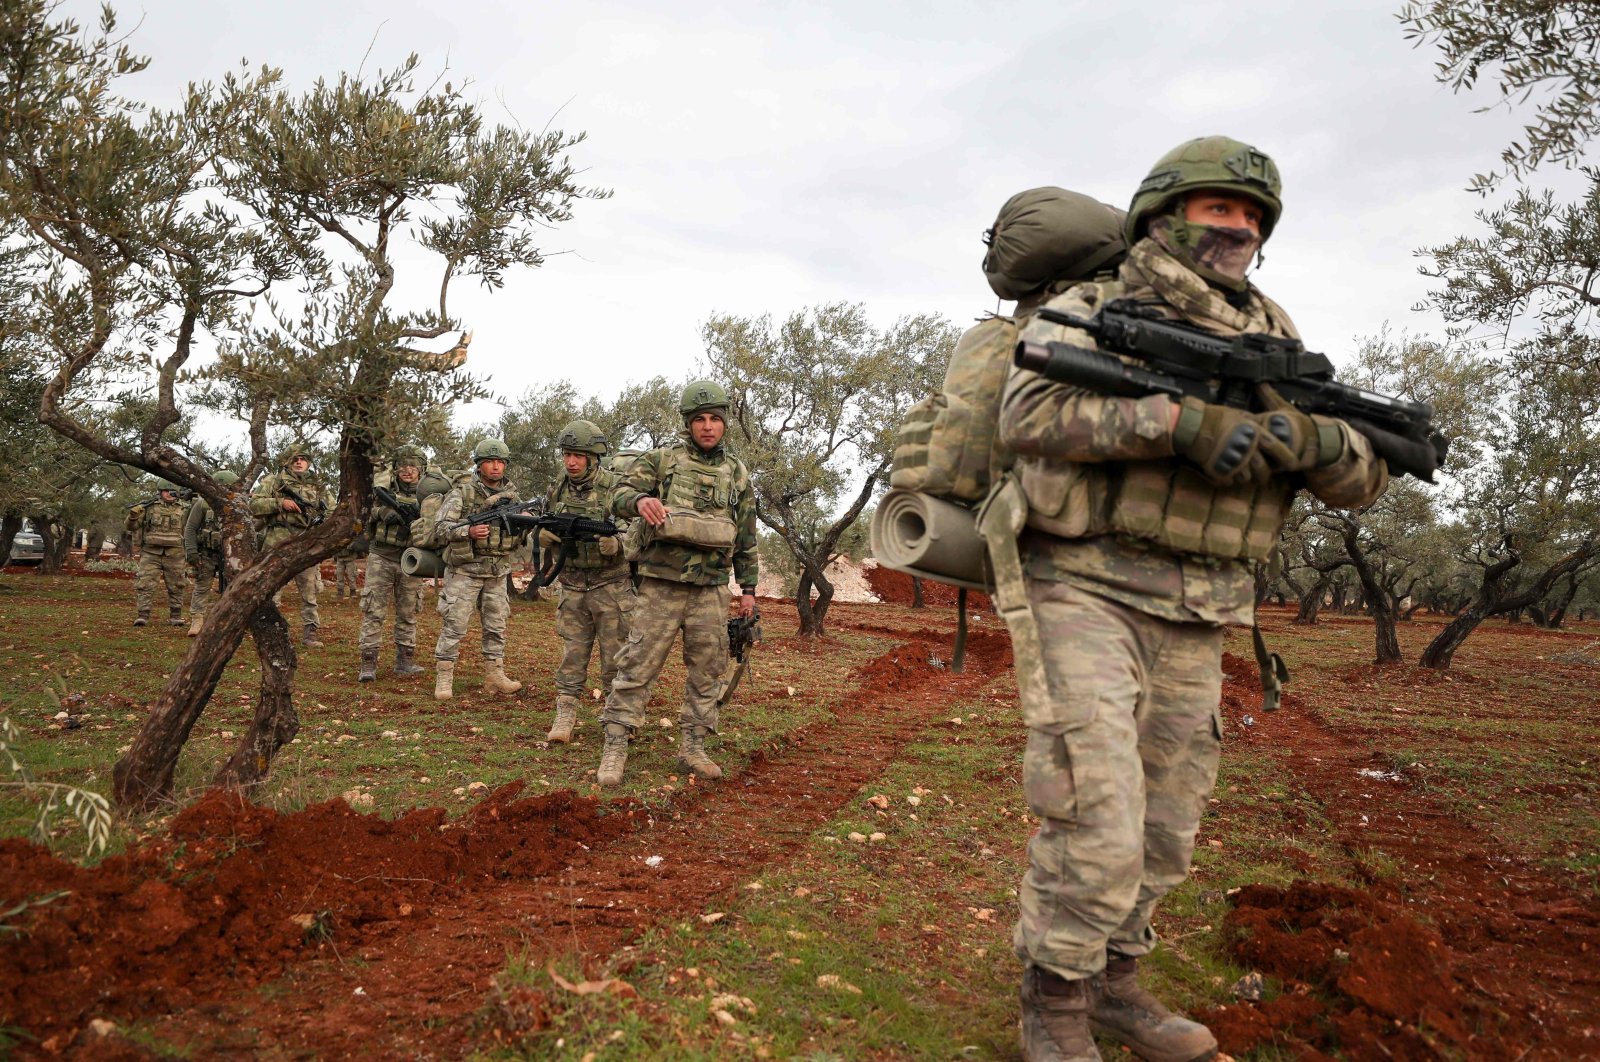 Turkish soldiers gather in the village of Qaminas, about 6 kilometers (3.7 miles) southeast of Idlib city in northwestern Syria, Feb. 10, 2020. (AFP Photo)